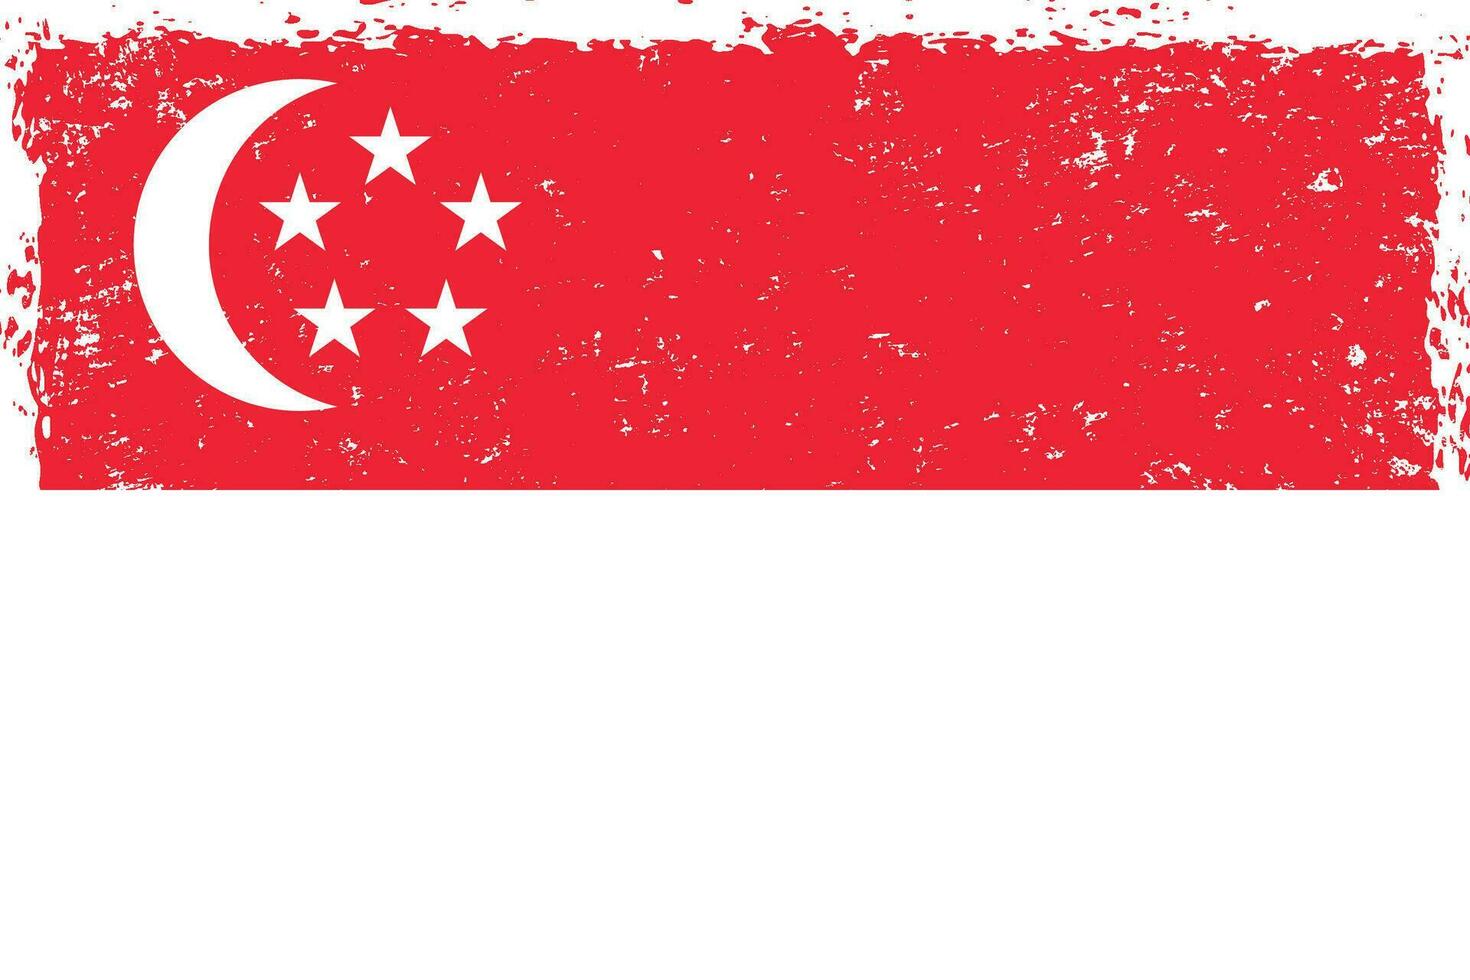 Singapore flag grunge distressed style vector